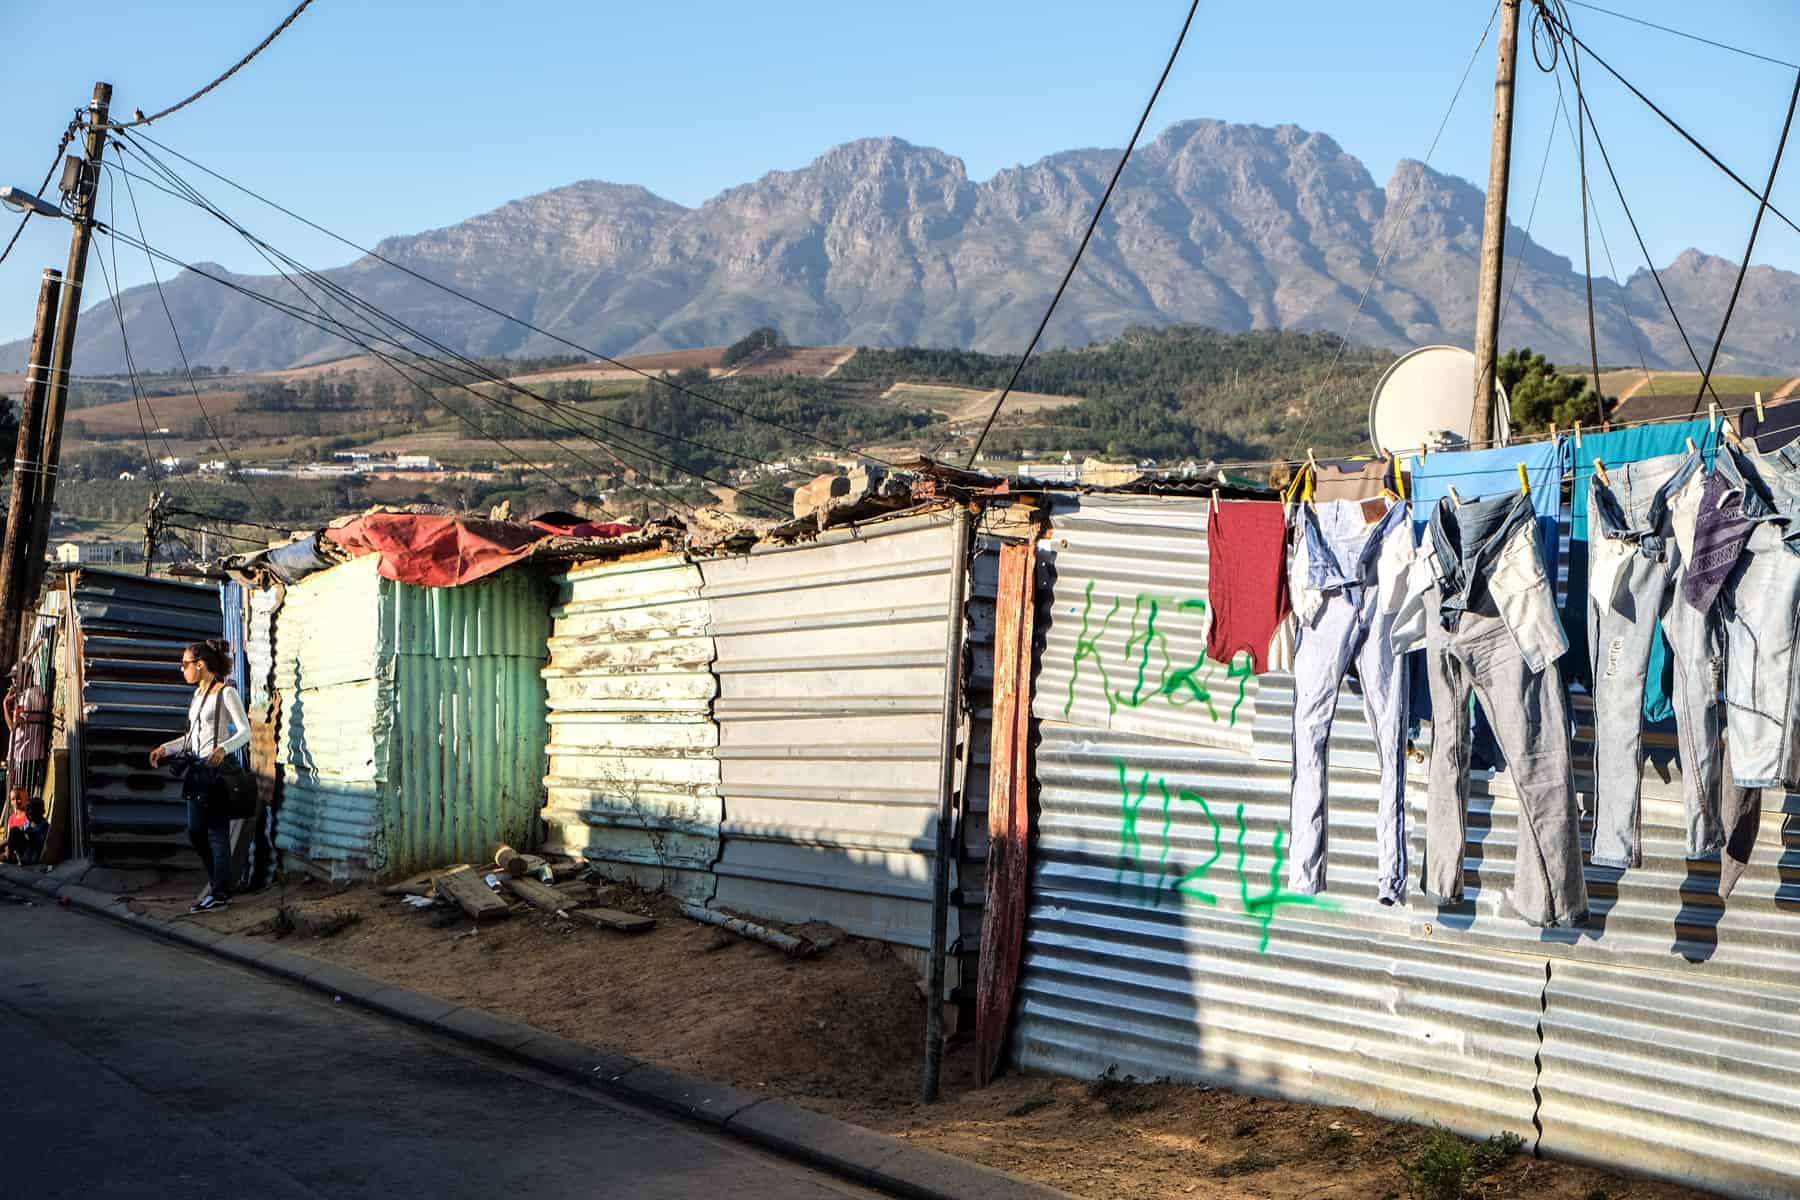 A row of single floor shanty houses in a Township in South Africa made of corrugated iron, painted green and white. Washing is hanging out to dry on the house on the left.